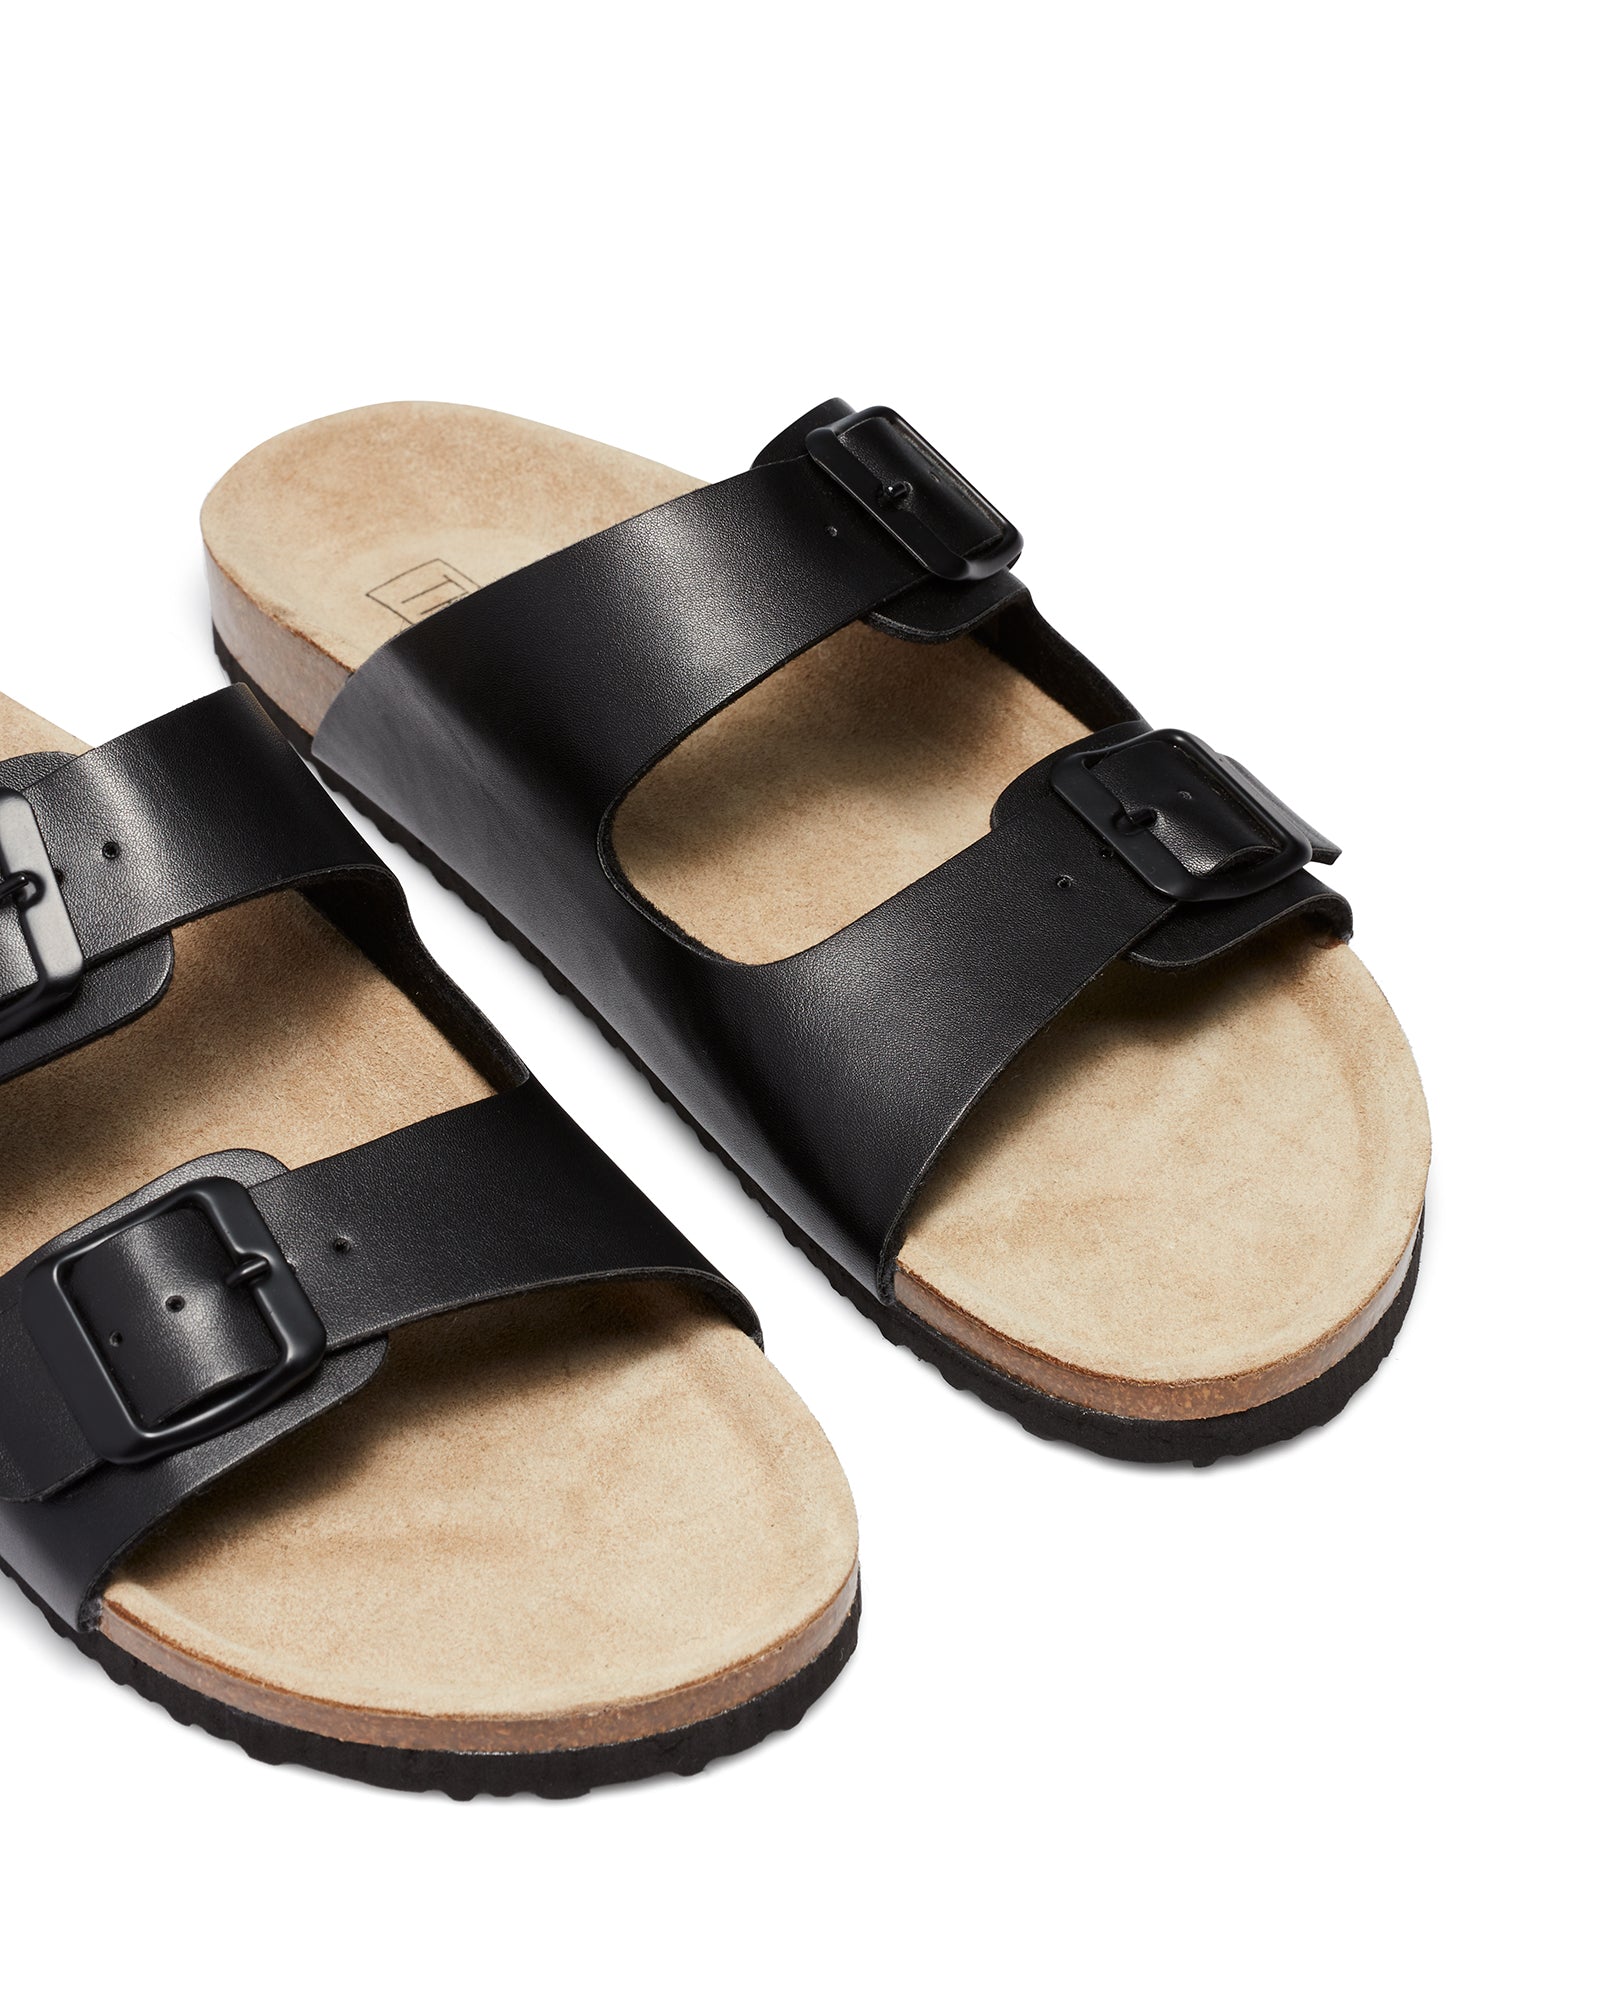 Therapy Shoes Stiva Black | Women's Slides | Sandals | Flats 